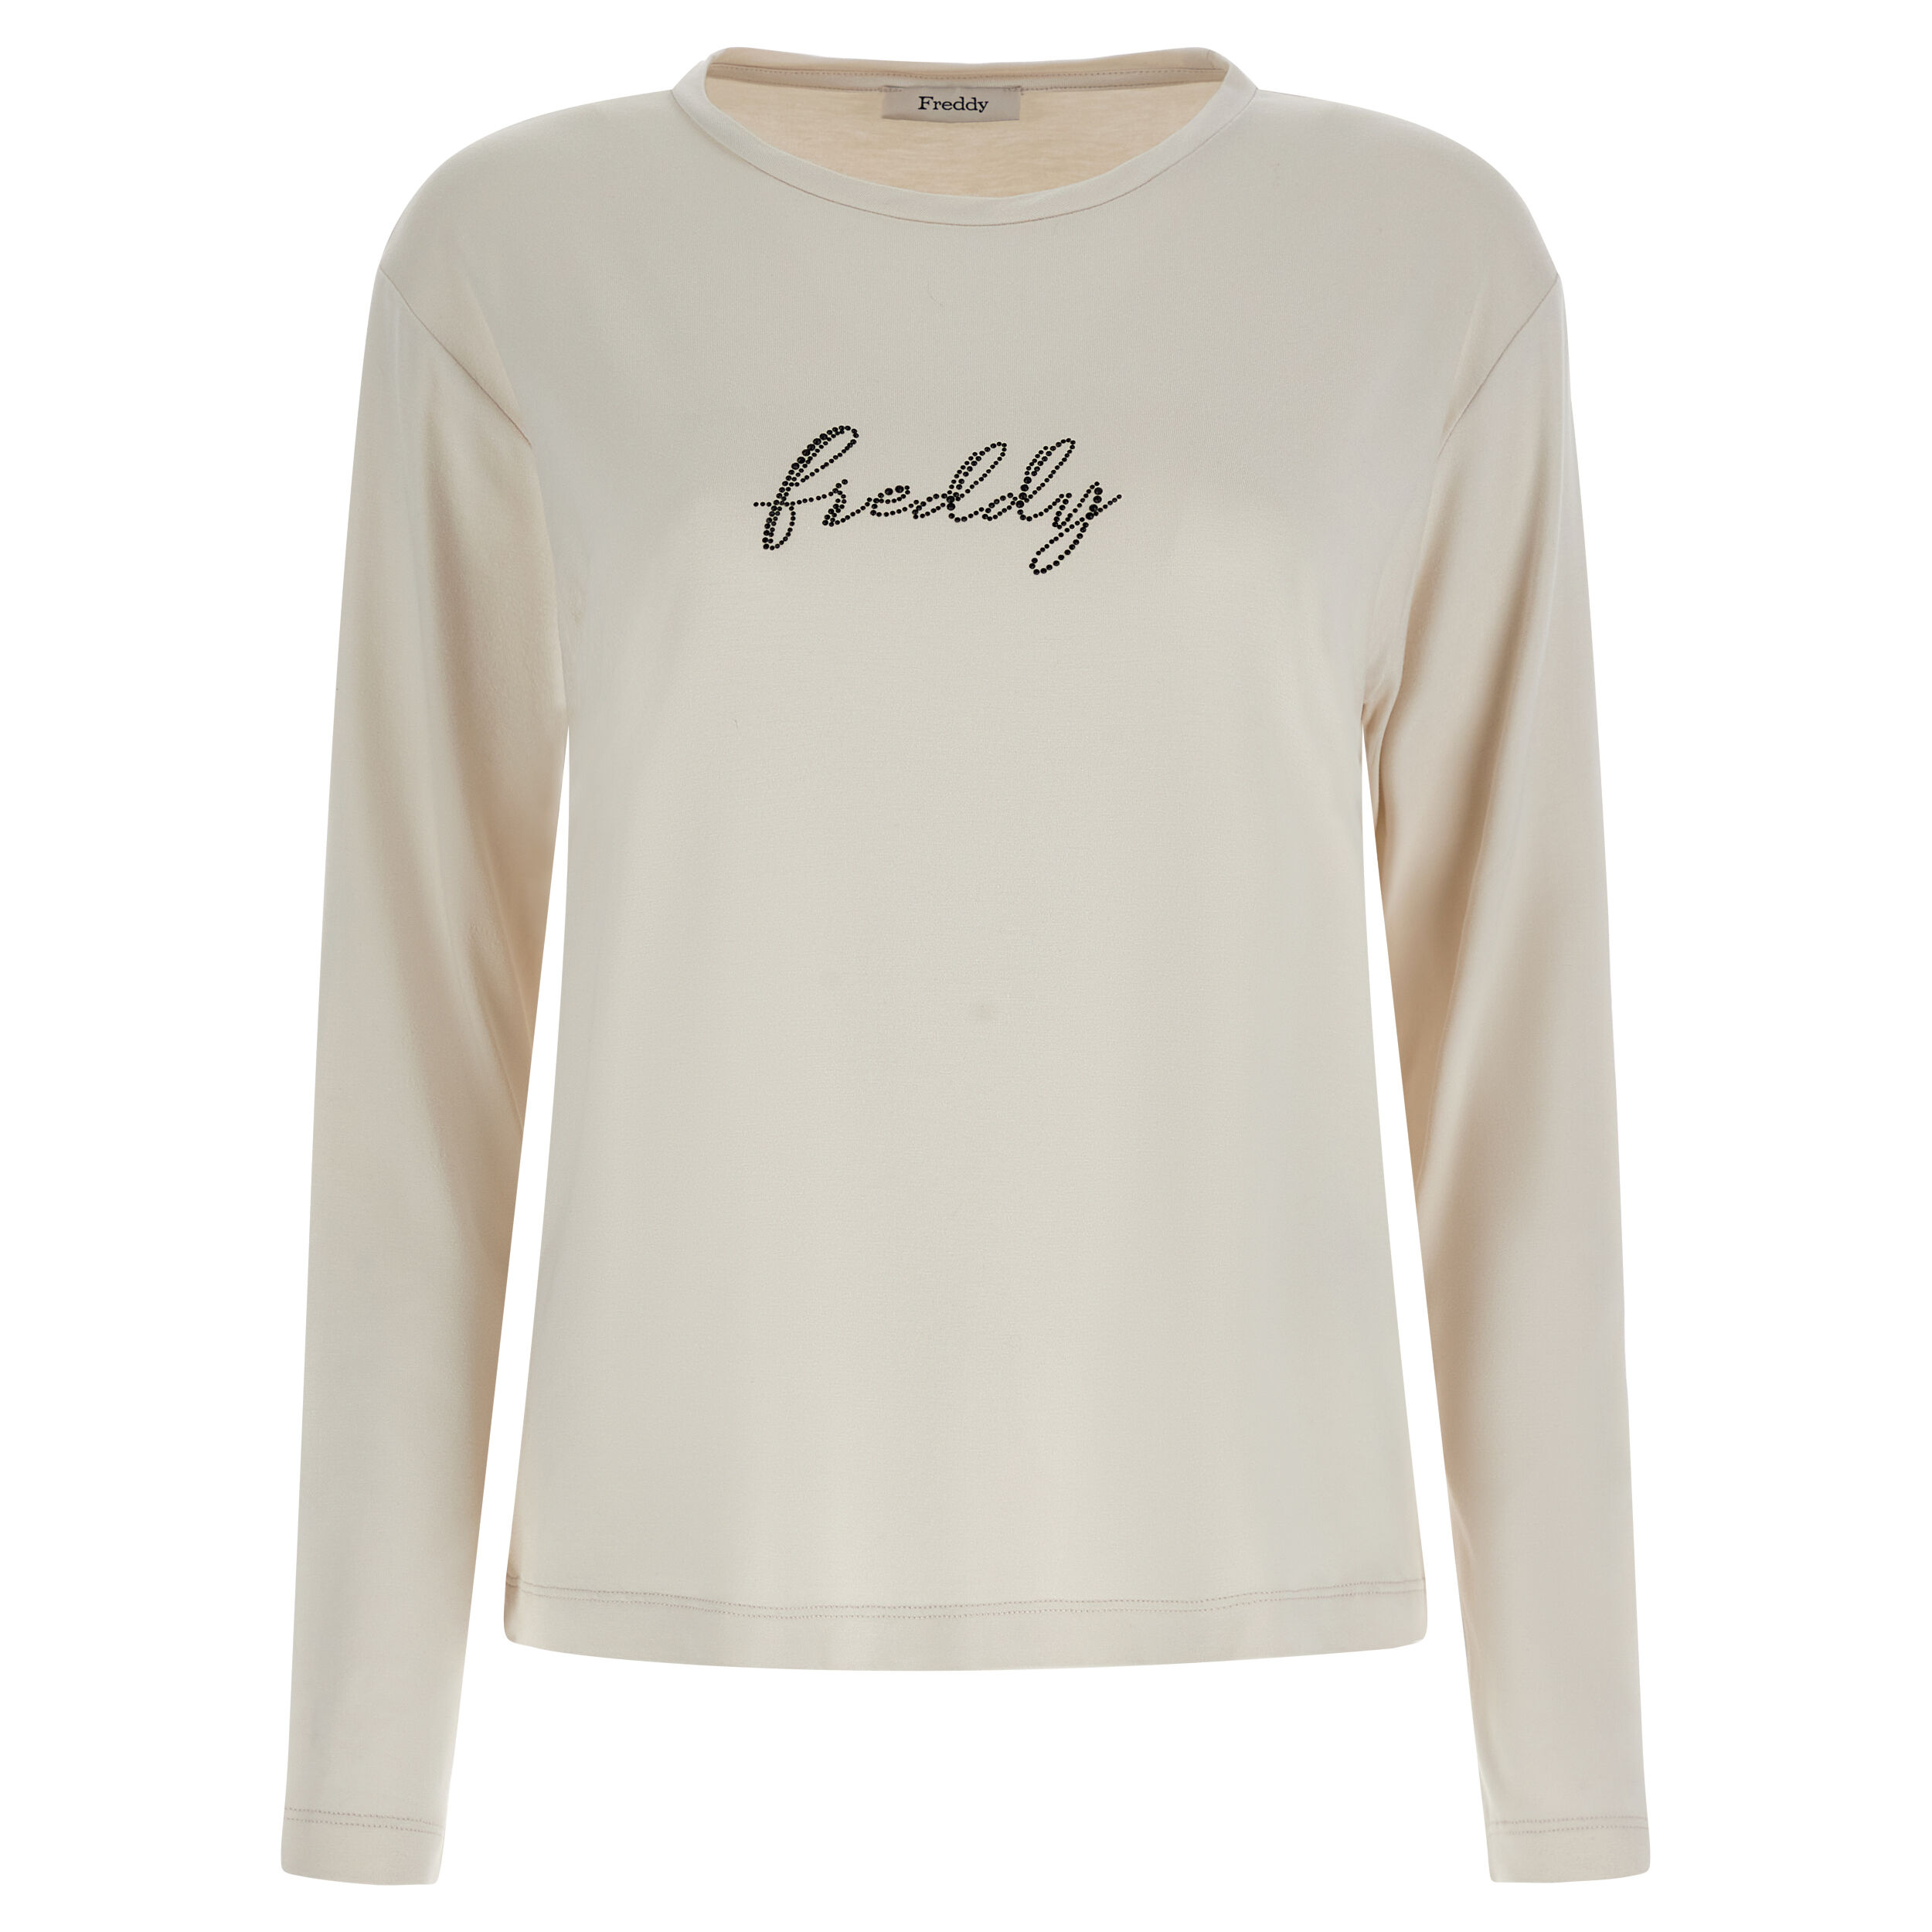 Freddy T-shirt manica lunga in jersey viscosa con logo in strass White Sand Donna Extra Large